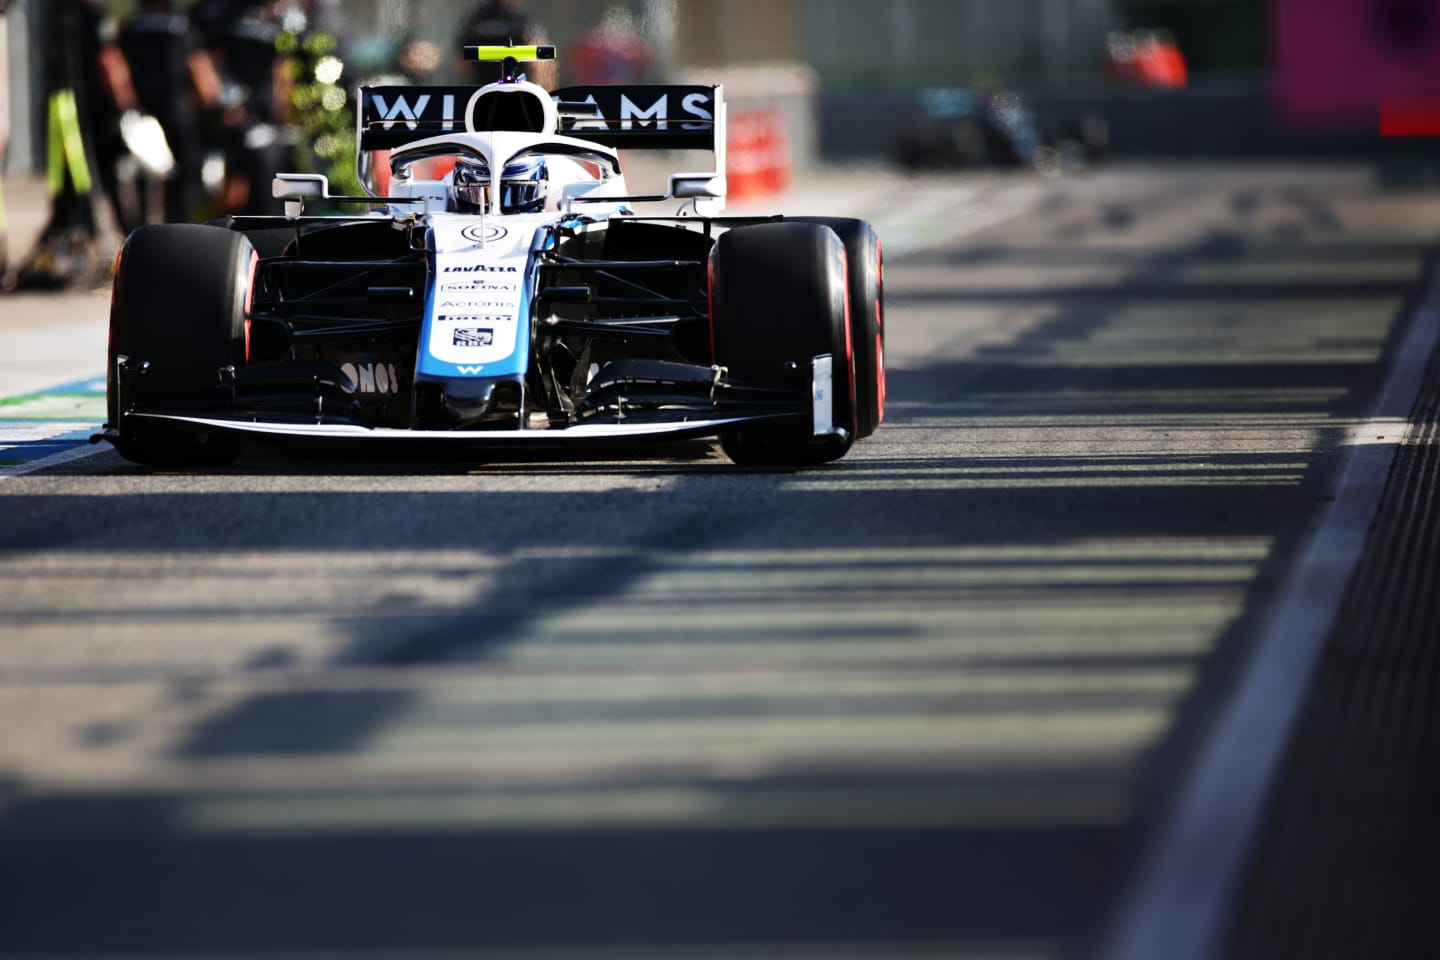 IMOLA, ITALY - OCTOBER 31: Nicholas Latifi of Canada driving the (6) Williams Racing FW43 Mercedes in the Pitlane during practice ahead of the F1 Grand Prix of Emilia Romagna at Autodromo Enzo e Dino Ferrari on October 31, 2020 in Imola, Italy. (Photo by Peter Fox/Getty Images)